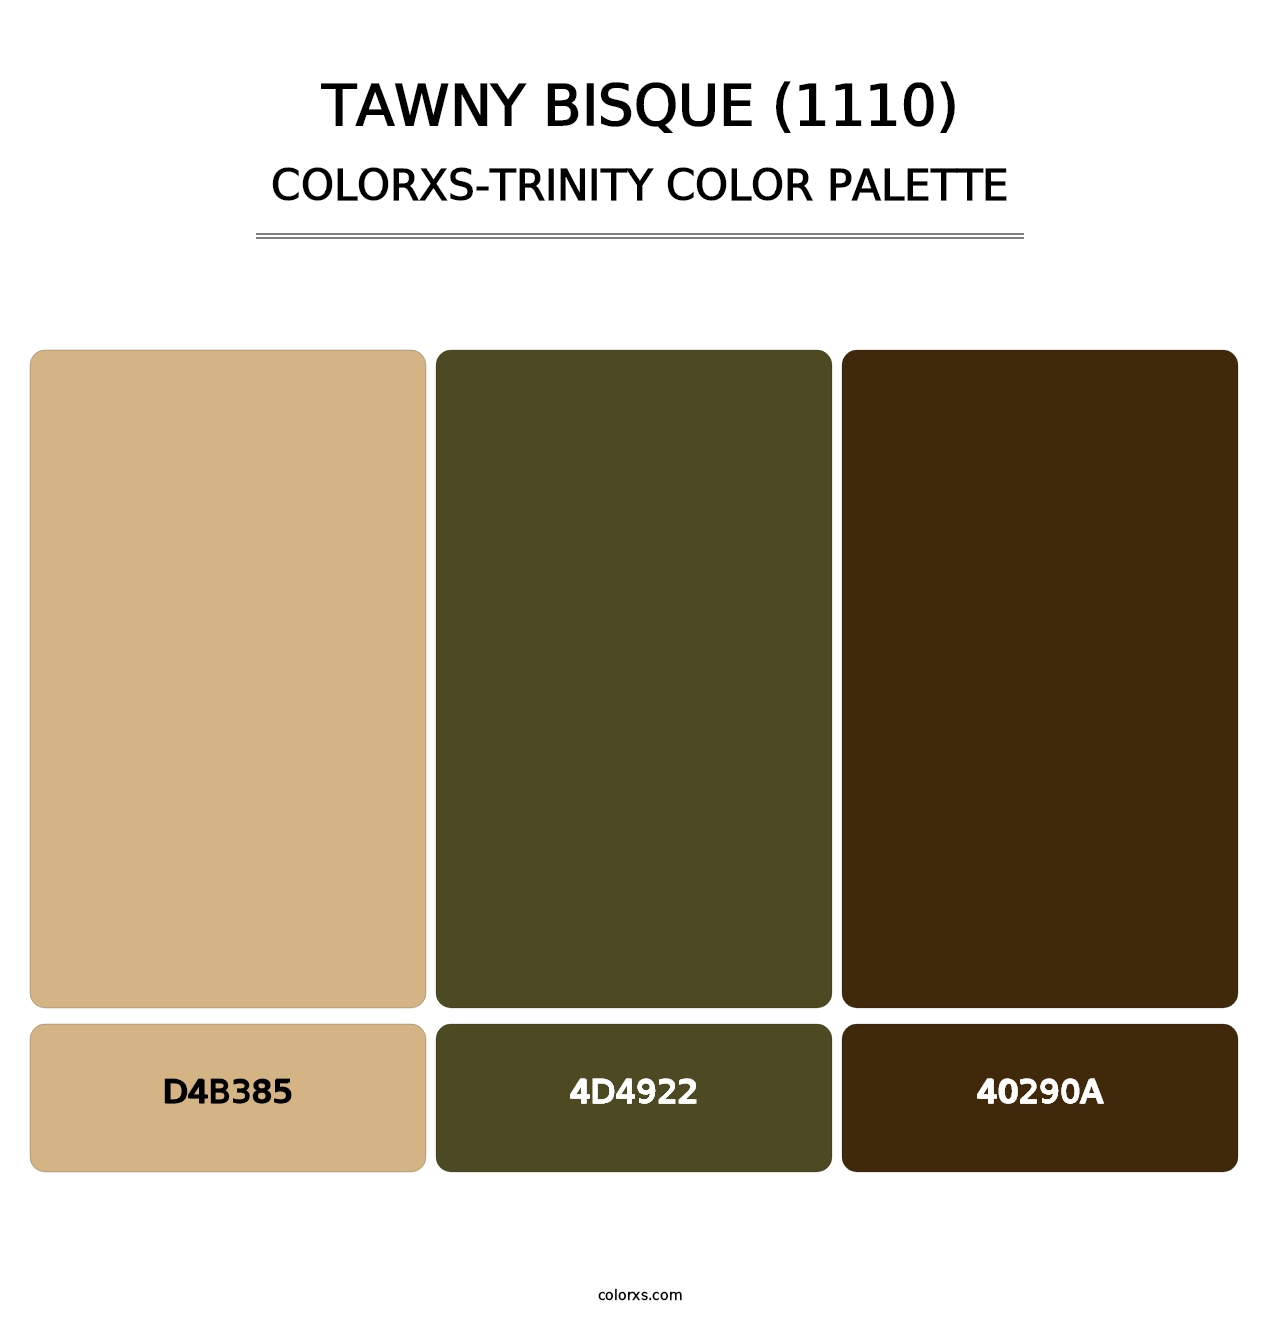 Tawny Bisque (1110) - Colorxs Trinity Palette